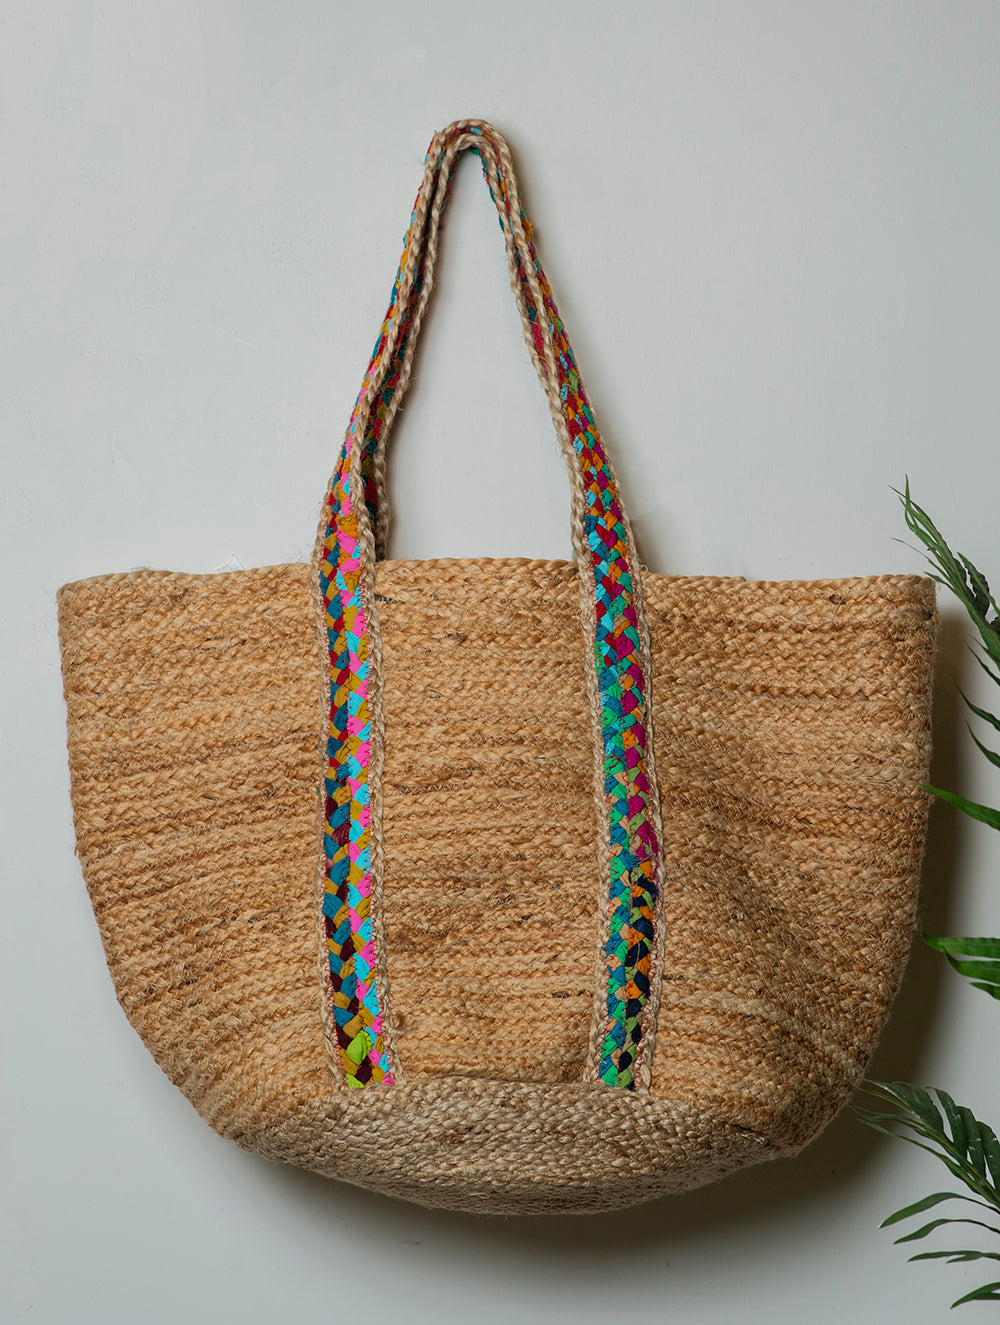 Load image into Gallery viewer, Large Jute Utility Tote Bag With Fabric Trimmings - Braid